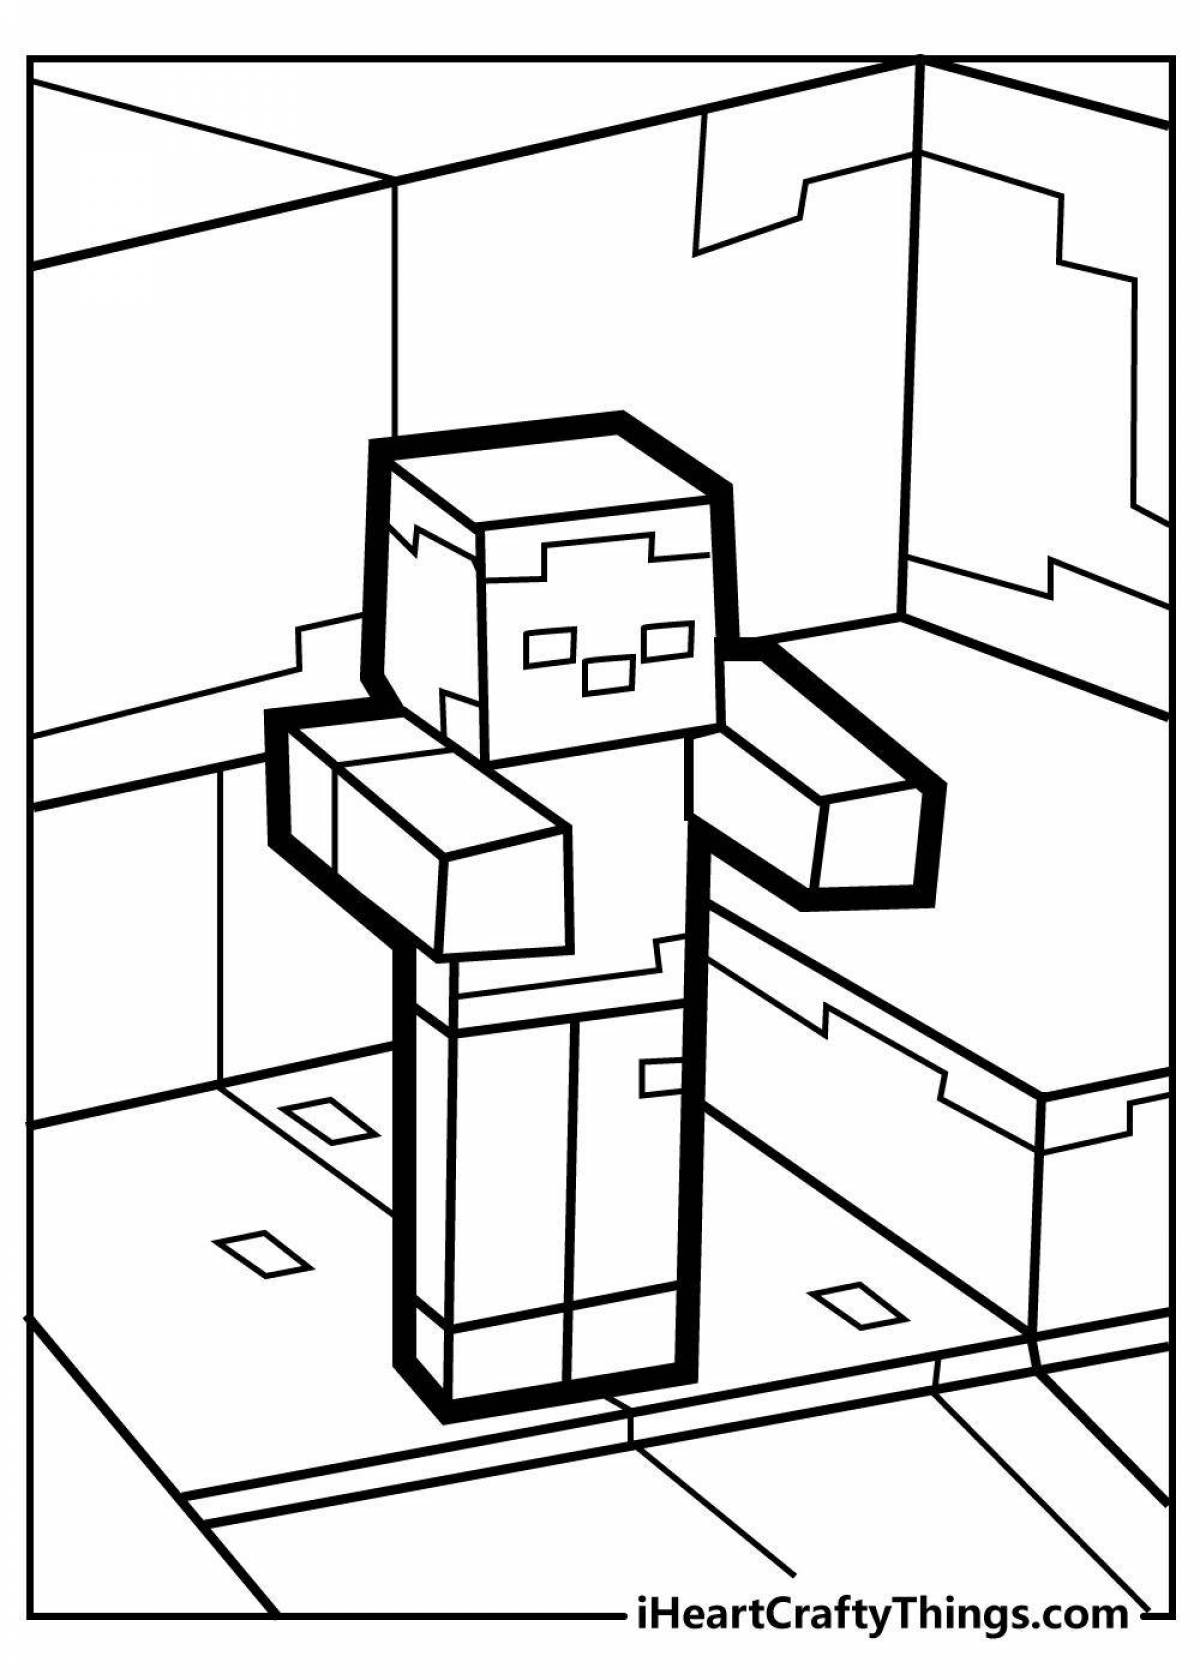 Minecraft workbench incredible coloring book